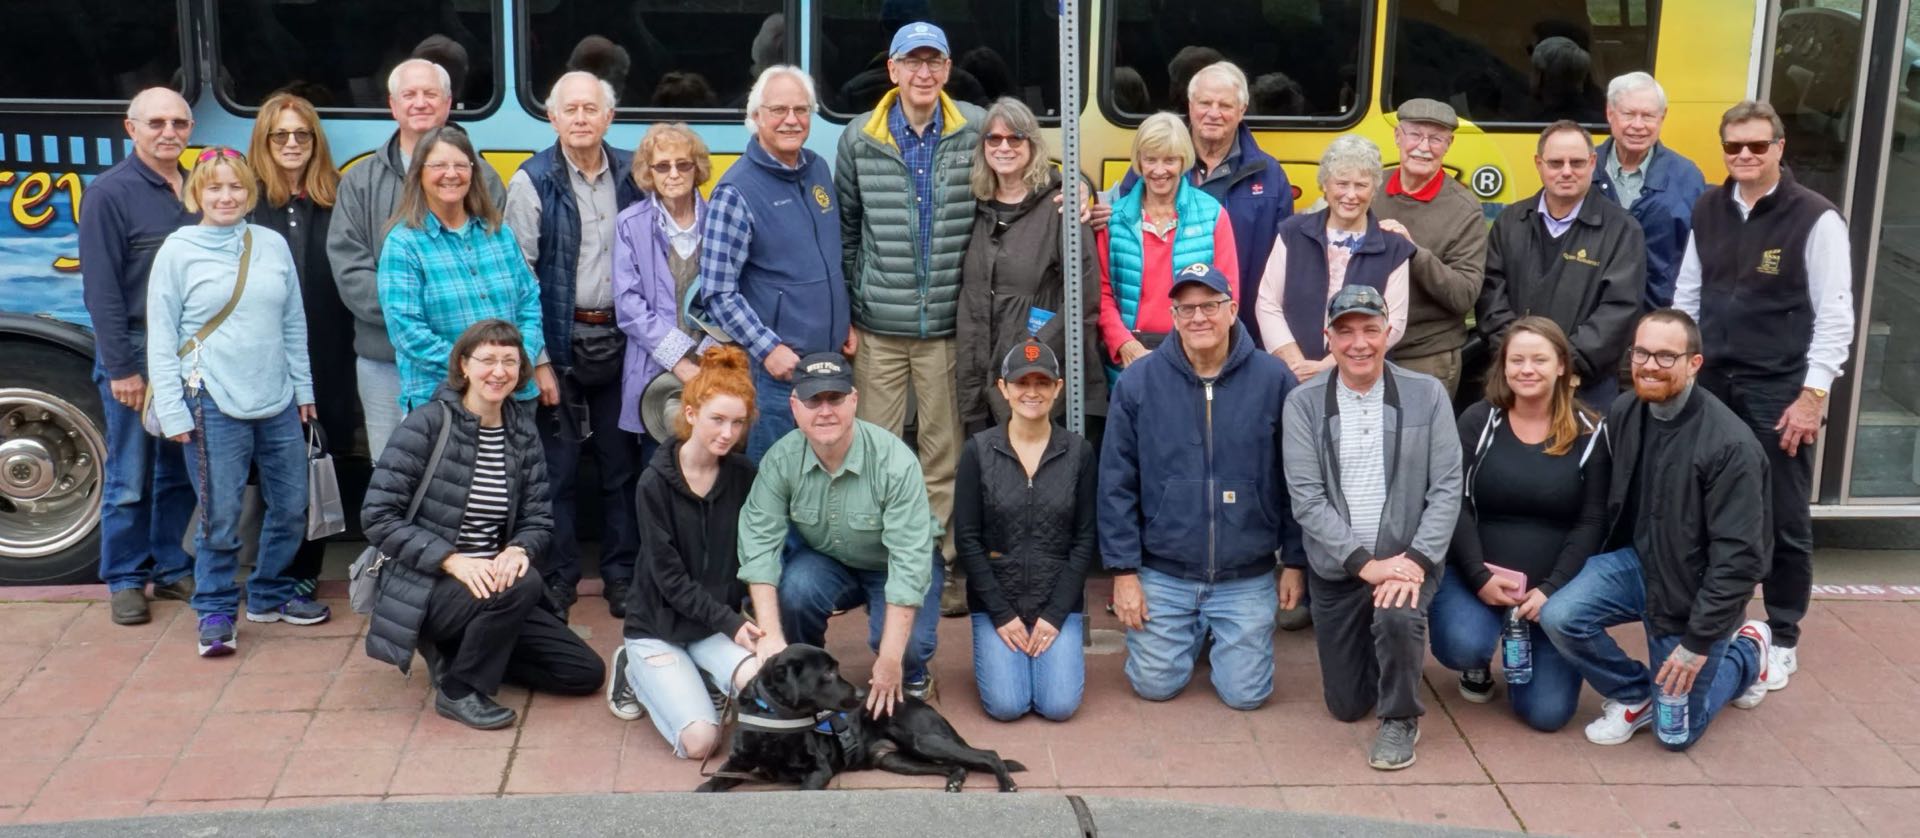 Rotary Club of Pacific Grove member group photo